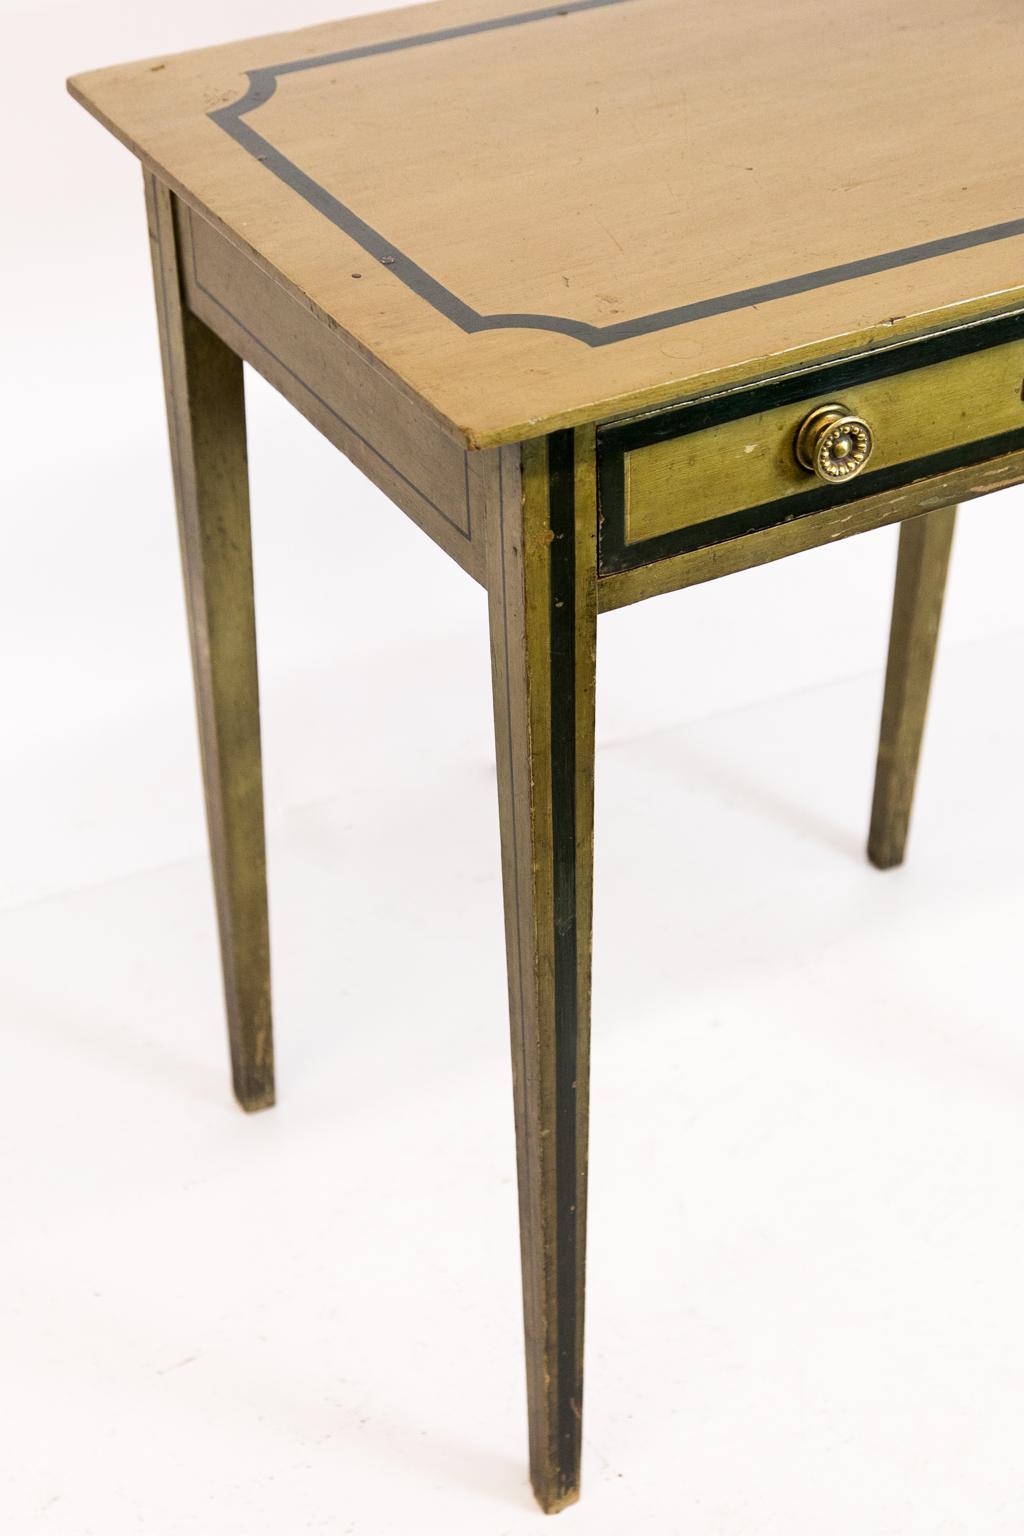 Mid-19th Century English Green Painted One Drawer Side Table